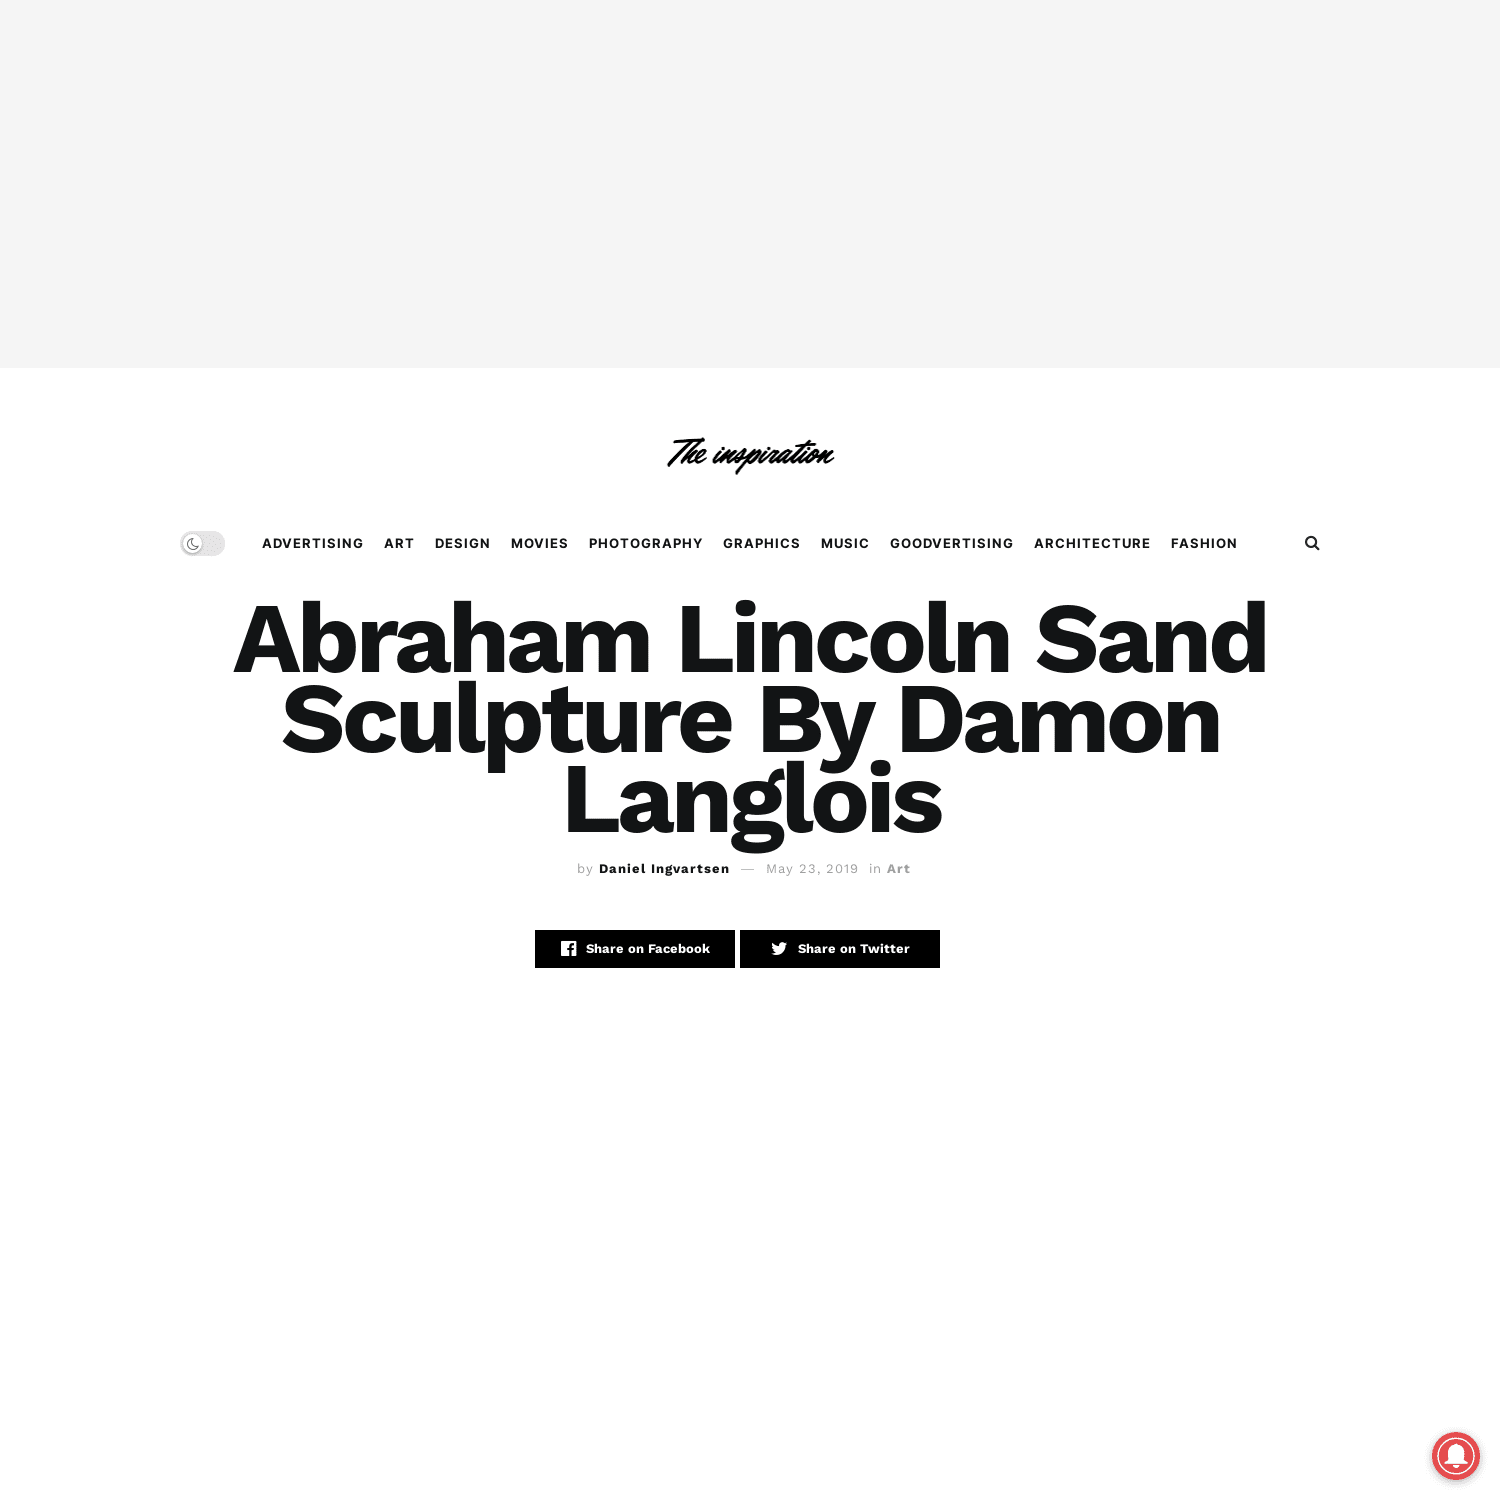 Abraham Lincoln Sand Sculpture By Damon Langlois